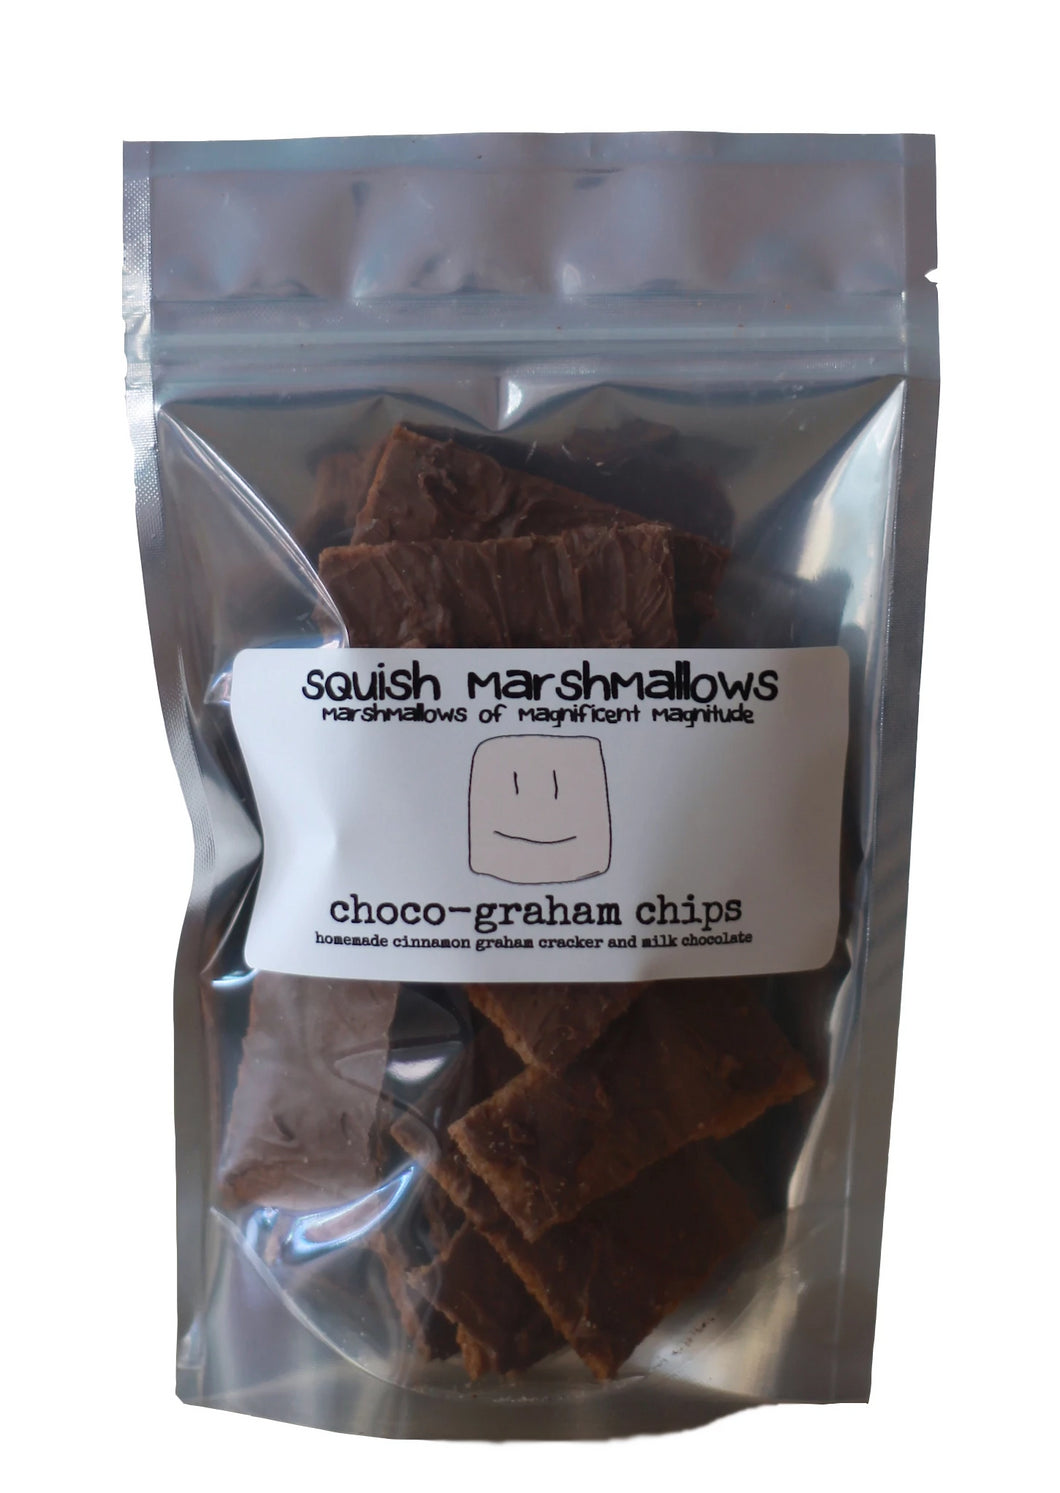 Packaged bag of homemade graham cracker chips with milk chocolate coating